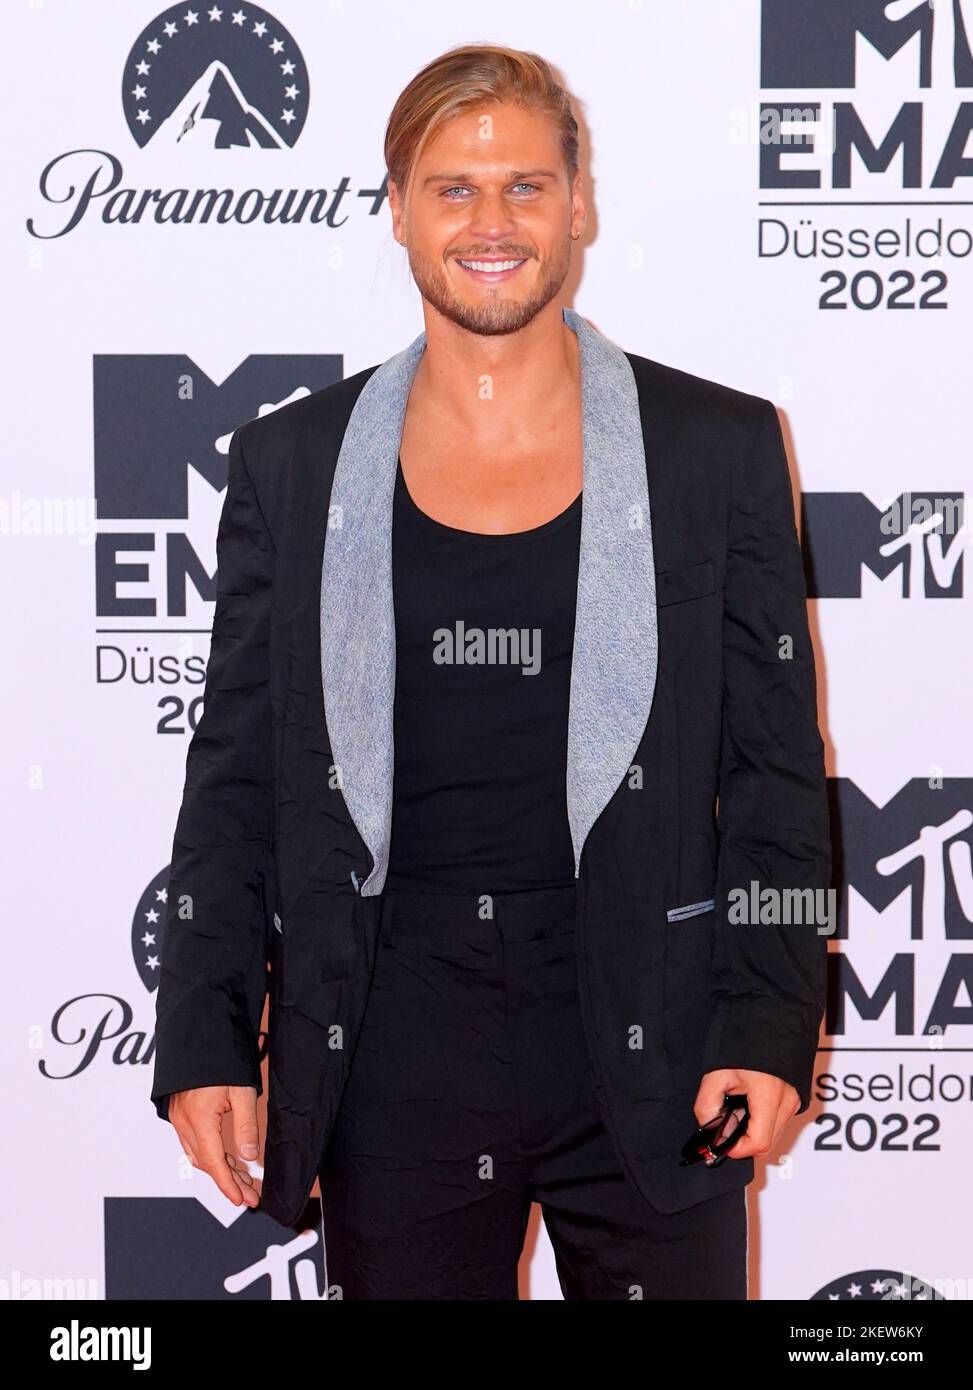 Rurik Gislason attending the MTV Europe Music Awards 2022 held at the PSD Bank Dome, Dusseldorf. Picture date: Sunday November 13, 2022. Stock Photo